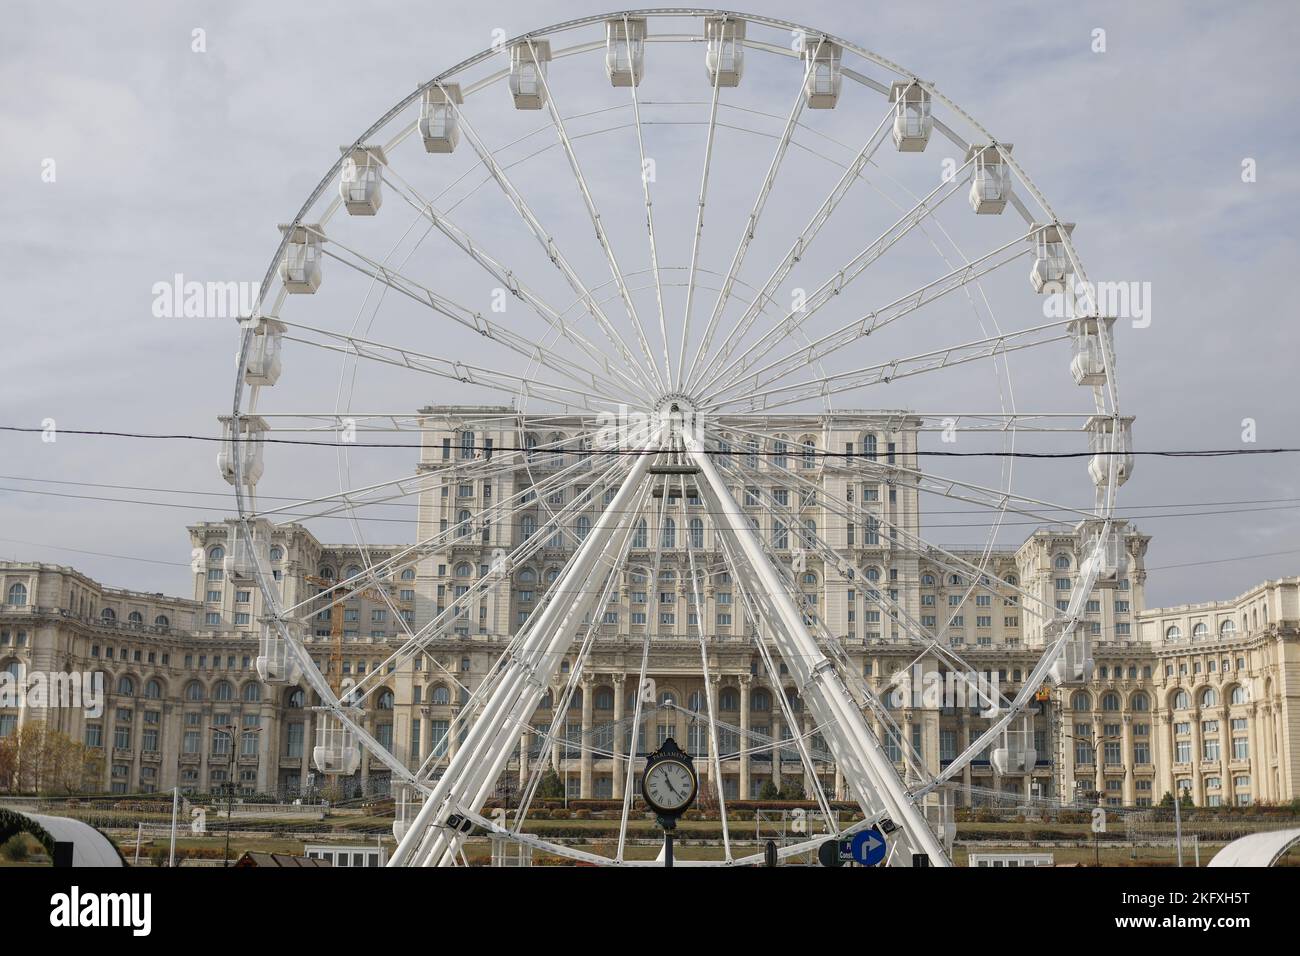 Bucharest, Romania - November 18, 2022: Details with the ferris wheel from the Christmas Market in Piata Constitutiei (Constitution Square) in Buchare Stock Photo